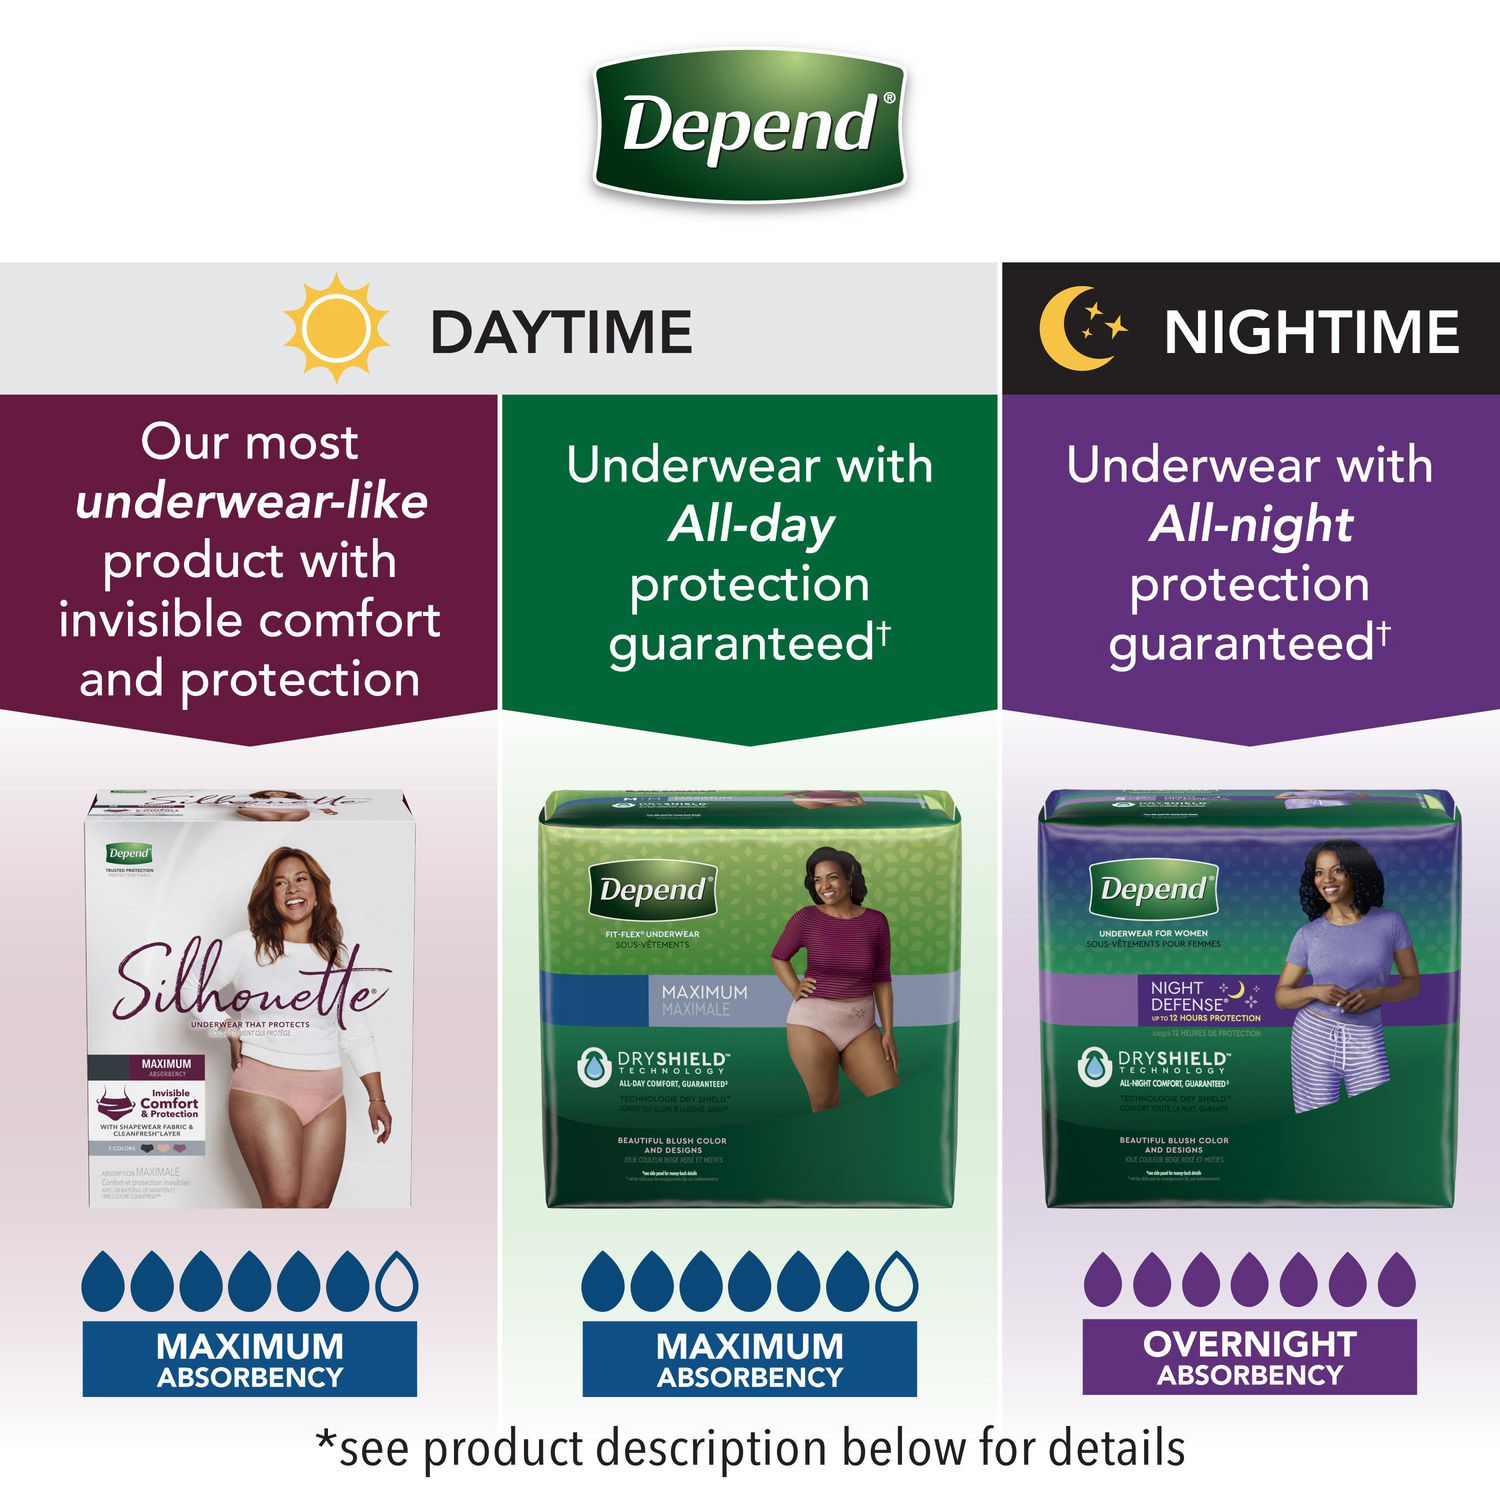 Depend Night Defense Adult Incontinence Disposable Overnight Size XL Blush  Underwear For Women, 12 ct - Gerbes Super Markets